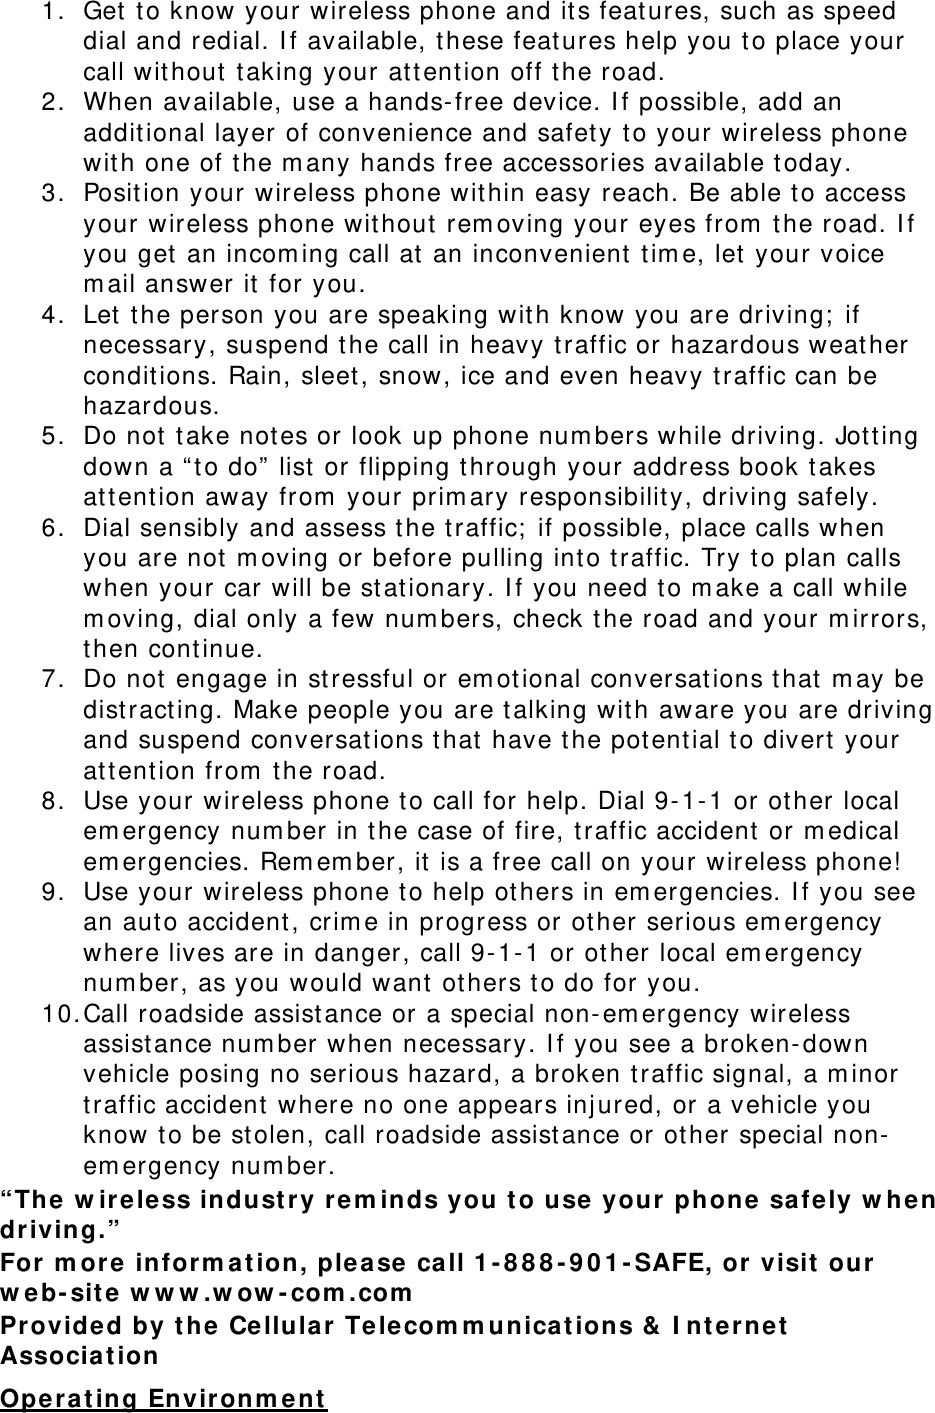 1. Get to know your wireless phone and it s feat ures, such as speed dial and redial. I f available, t hese feat ures help you to place your call without t aking your at t ention off the road. 2. When available, use a hands- free device. I f possible, add an additional layer of convenience and safet y t o your wireless phone with one of t he m any hands free accessories available t oday. 3. Posit ion your wireless phone wit hin easy reach. Be able t o access your wireless phone without  rem oving your eyes from  t he road. I f you get  an incom ing call at  an inconvenient tim e, let your voice m ail answer it for you. 4. Let the person you are speaking wit h know you are driving;  if necessary, suspend the call in heavy t raffic or hazardous weat her conditions. Rain, sleet , snow, ice and even heavy t raffic can be hazardous. 5. Do not  t ake not es or look up phone num bers while driving. Jotting down a “ t o do”  list  or flipping through your address book t akes at t ention away from  your prim ary responsibility, driving safely. 6. Dial sensibly and assess t he t raffic;  if possible, place calls when you are not  m oving or before pulling int o t raffic. Try t o plan calls when your car will be st ationary. I f you need t o m ake a call while m oving, dial only a few num bers, check t he road and your m irrors, then cont inue. 7. Do not  engage in st ressful or em otional conversations t hat  m ay be dist ract ing. Make people you are t alking wit h aware you are driving and suspend conversations t hat have t he potent ial t o divert your at t ention from  t he road. 8. Use your wireless phone t o call for help. Dial 9- 1- 1 or ot her local em ergency num ber in the case of fire, t raffic accident  or m edical em ergencies. Rem em ber, it  is a free call on your wireless phone! 9. Use your wireless phone t o help ot hers in em ergencies. I f you see an aut o accident, crim e in progress or other serious em ergency where lives are in danger, call 9- 1- 1 or other local em ergency num ber, as you would want  others t o do for you. 10. Call roadside assist ance or a special non- em ergency wireless assist ance num ber when necessary. I f you see a broken- down vehicle posing no serious hazard, a broken t raffic signal, a m inor traffic accident  where no one appears inj ured, or a vehicle you know t o be stolen, call roadside assist ance or other special non-em ergency num ber. “The w ir eless industry r em inds you to use  your  phone sa fely w hen driving.” For m ore inform a t ion, ple ase call 1 - 8 8 8 - 9 0 1 - SAFE, or  visit  our w eb- sit e  w w w .w ow - com .com  Provided by the Cellular  Te lecom m unica t ions &amp;  I nt e rnet  Associa t ion  Opera t ing Environm ent 